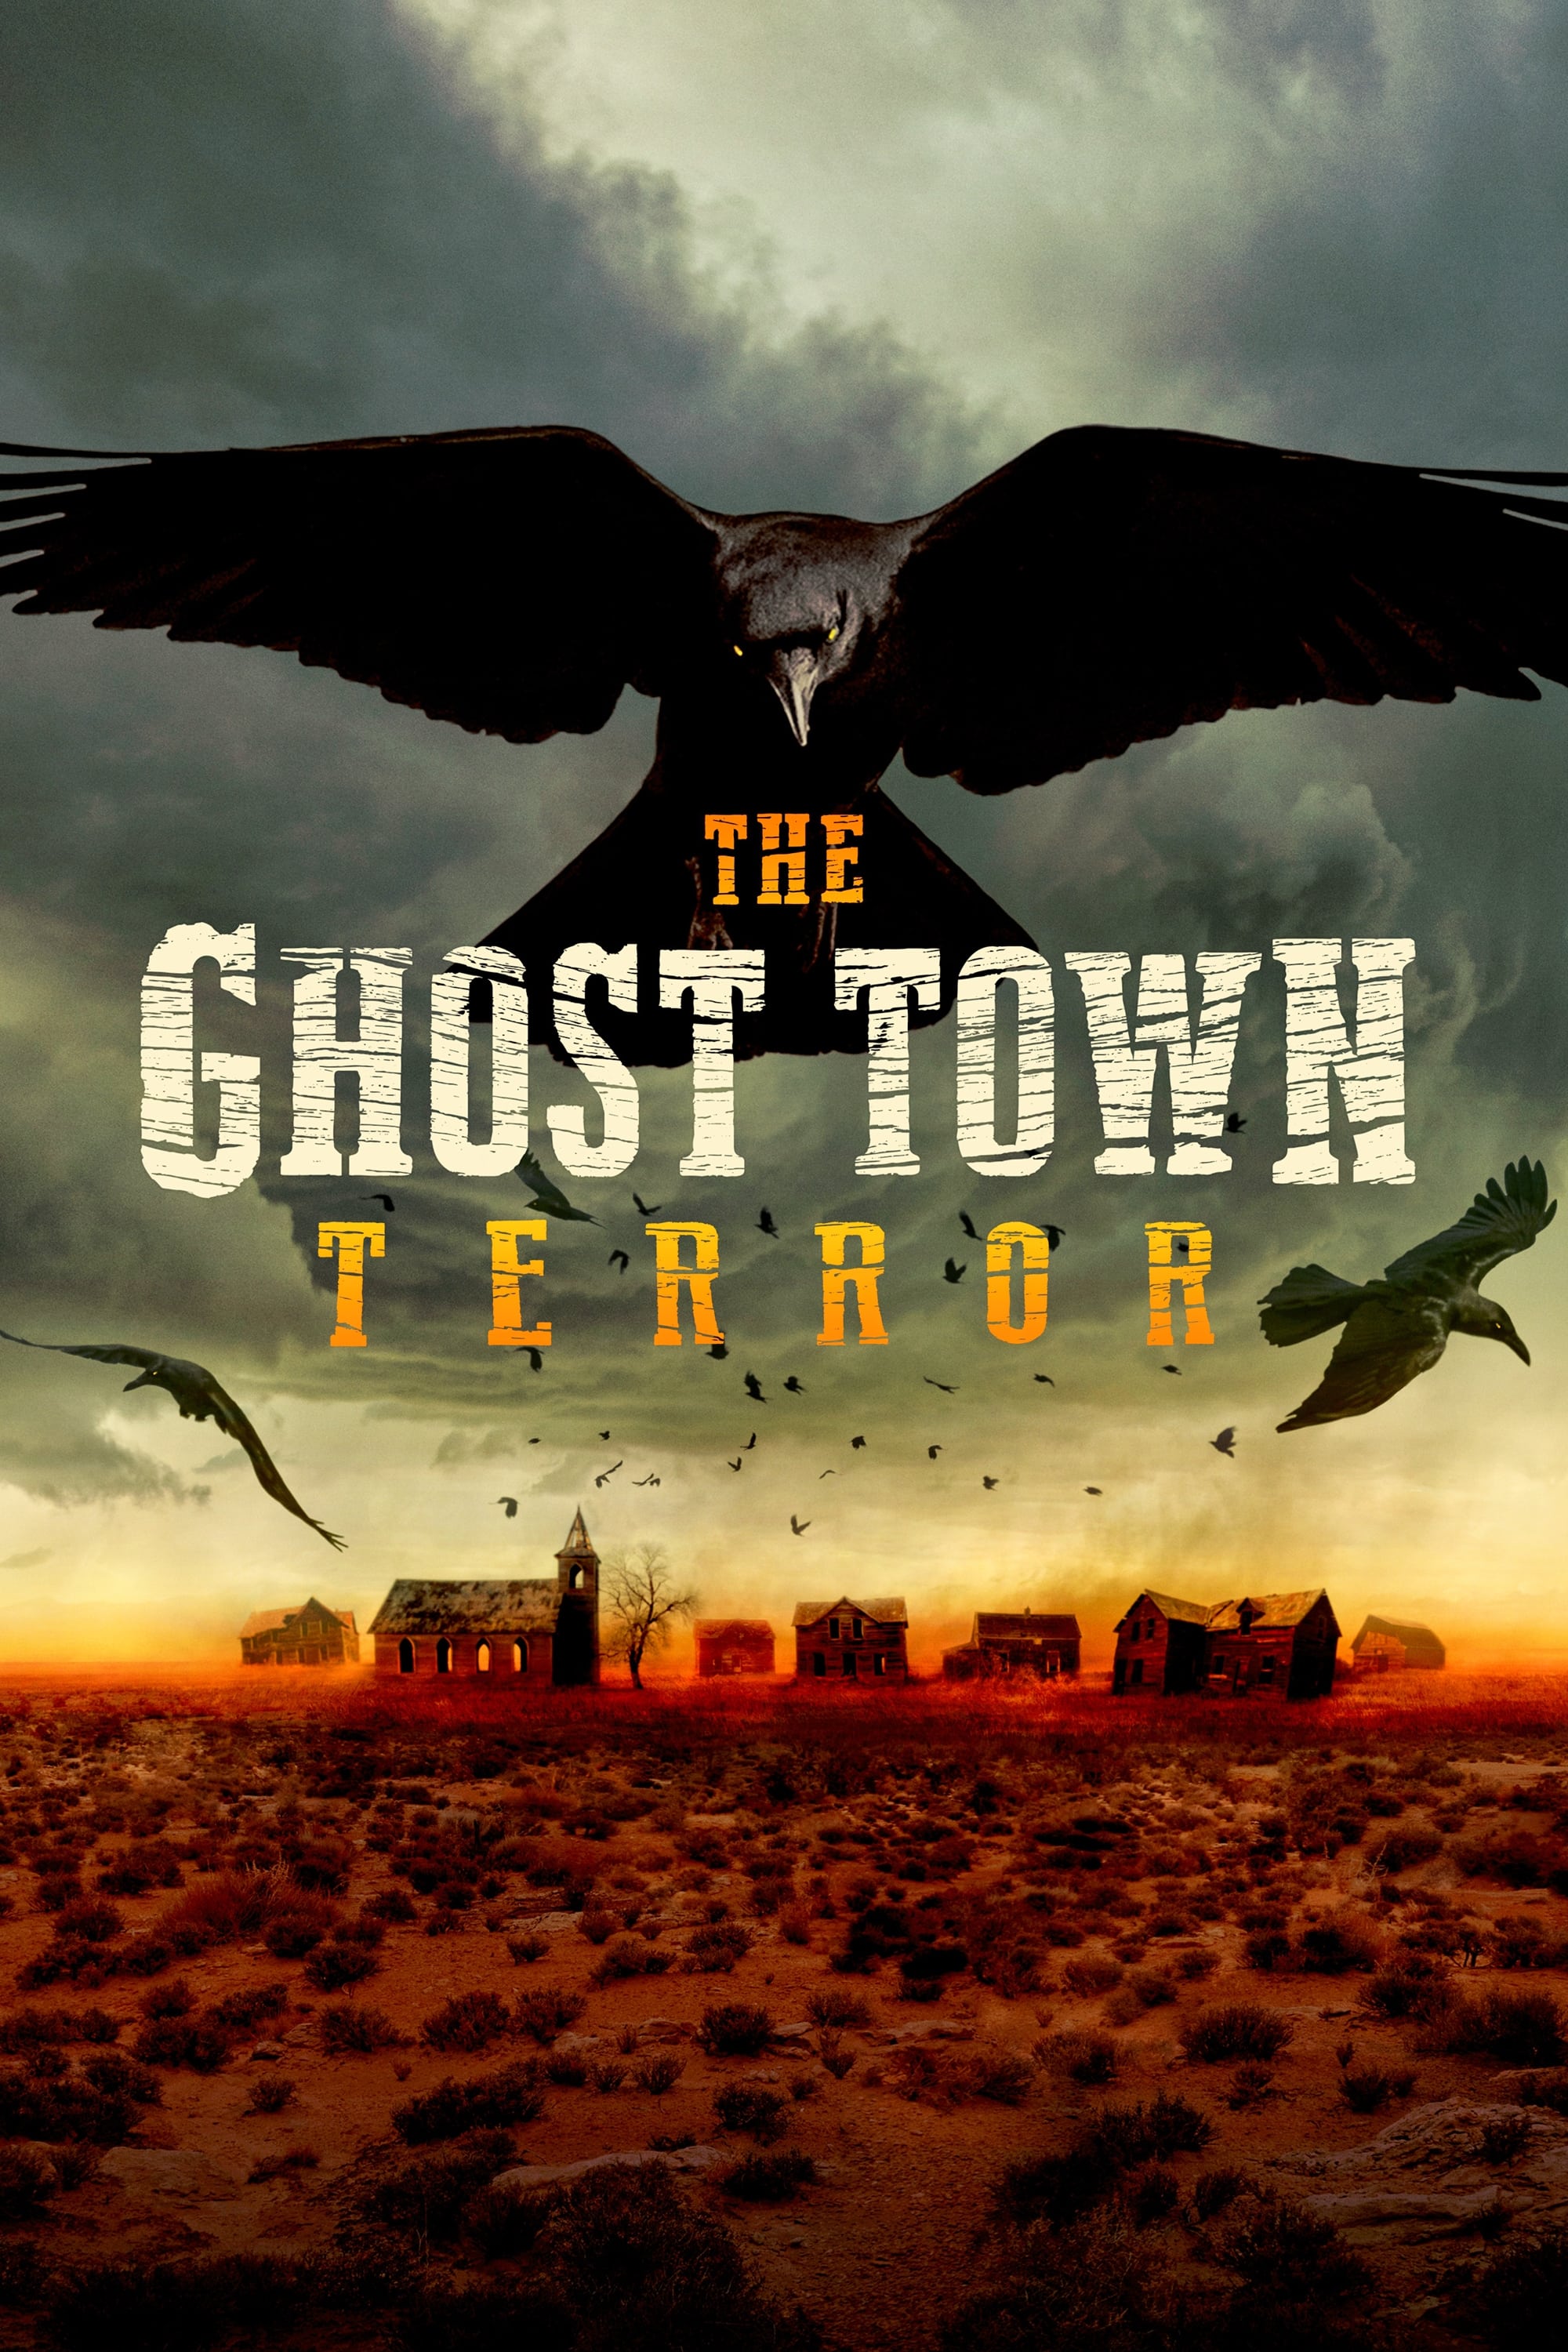 The Ghost Town Terror